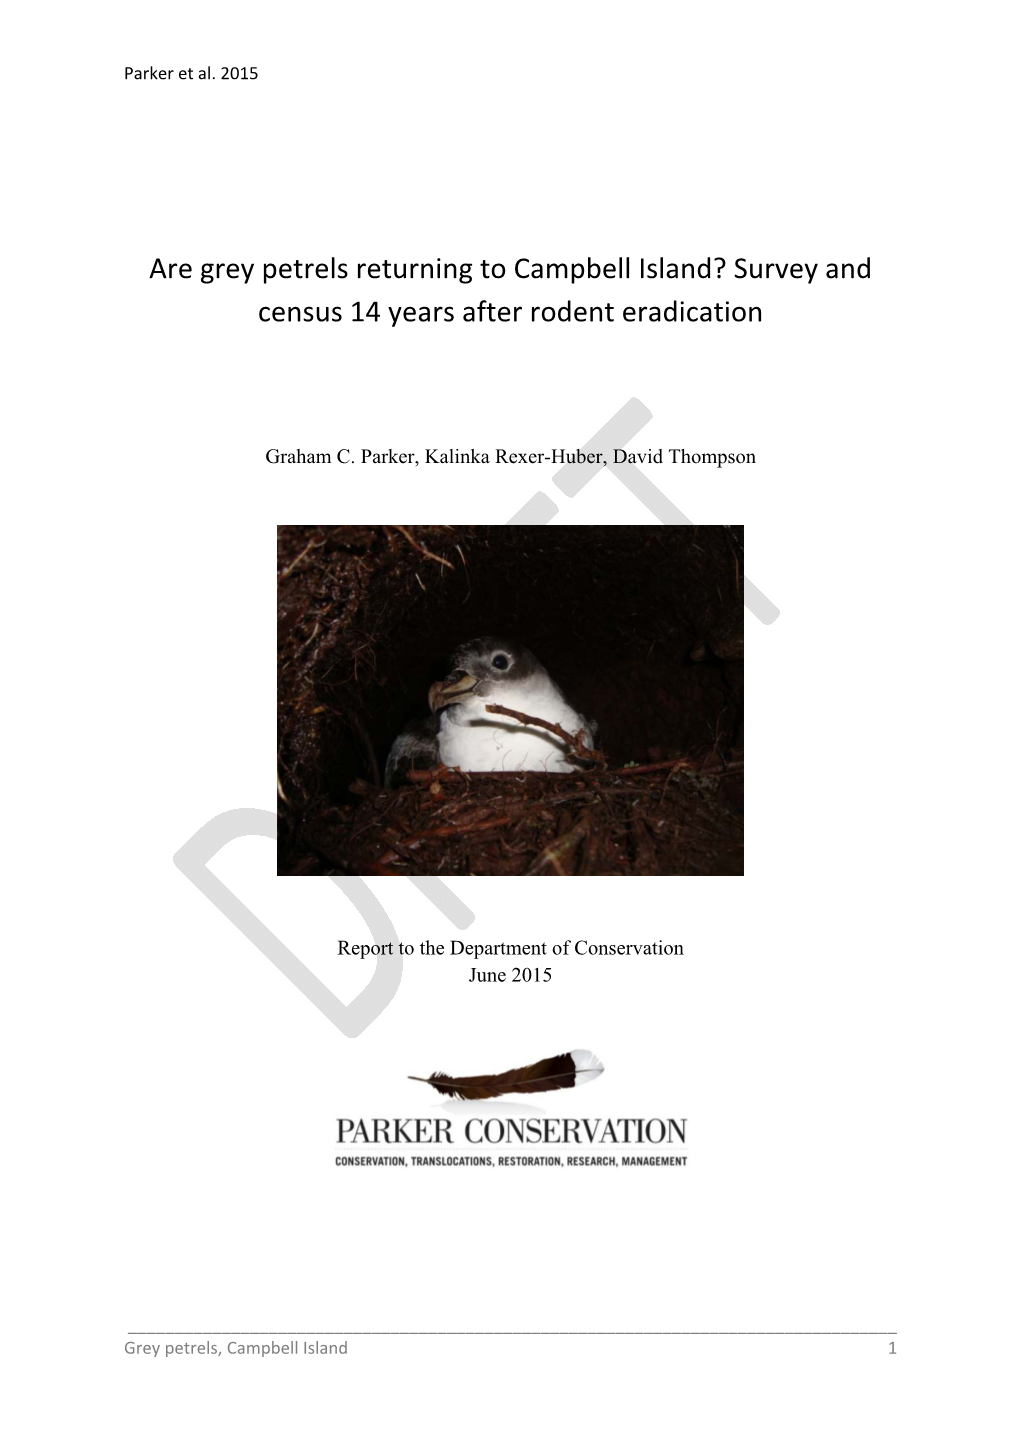 Grey Petrels Returning to Campbell Island? Survey and Census 14 Years After Rodent Eradication